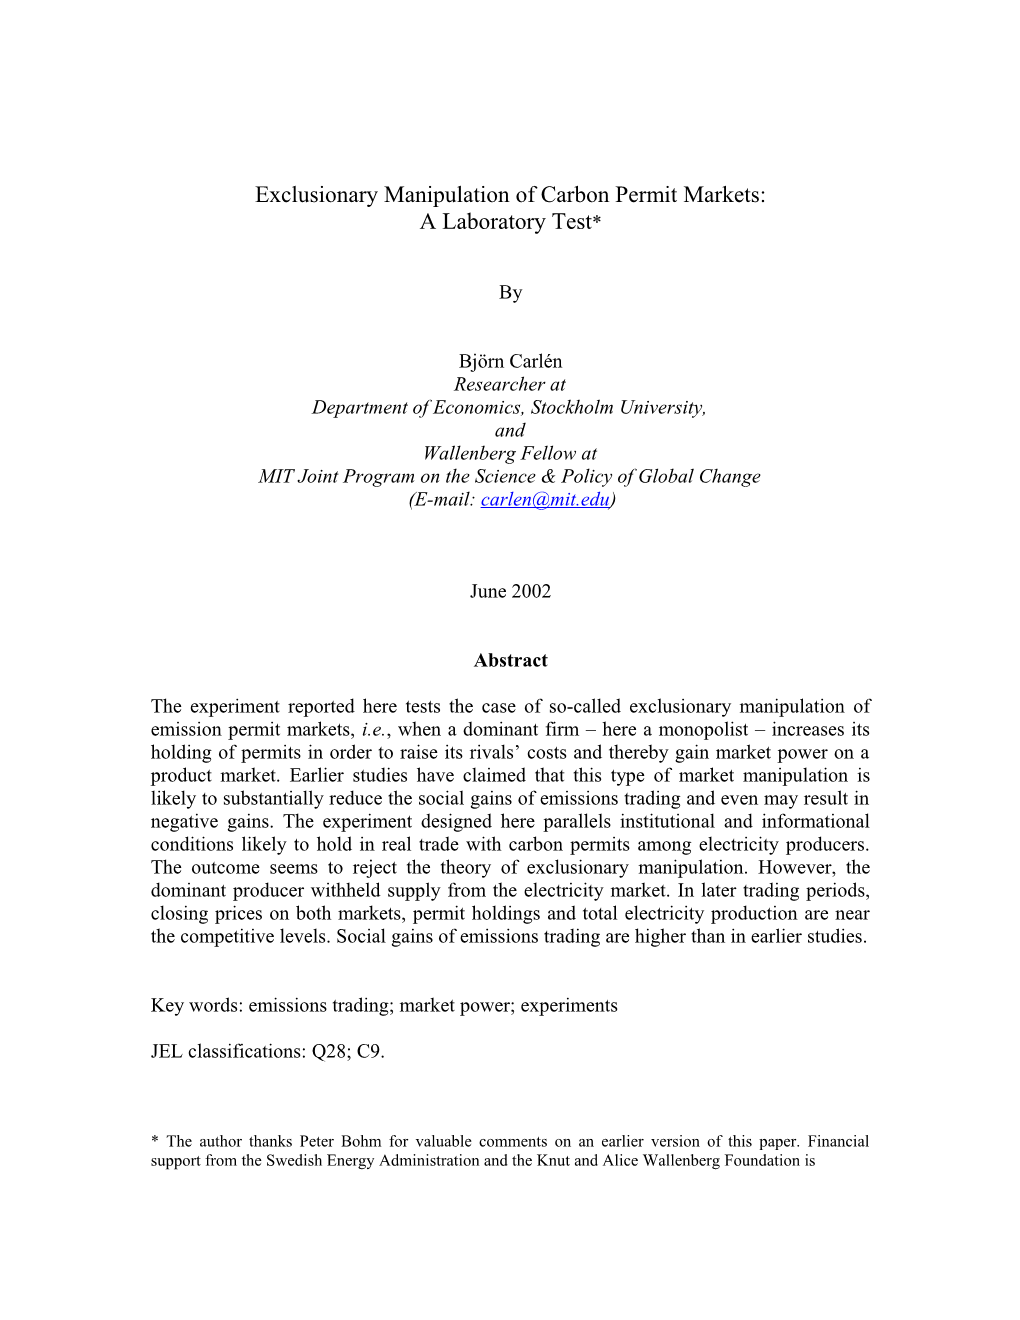 A Laboratory Test of Exclusionary Manipulation of Markets for Emission Permits